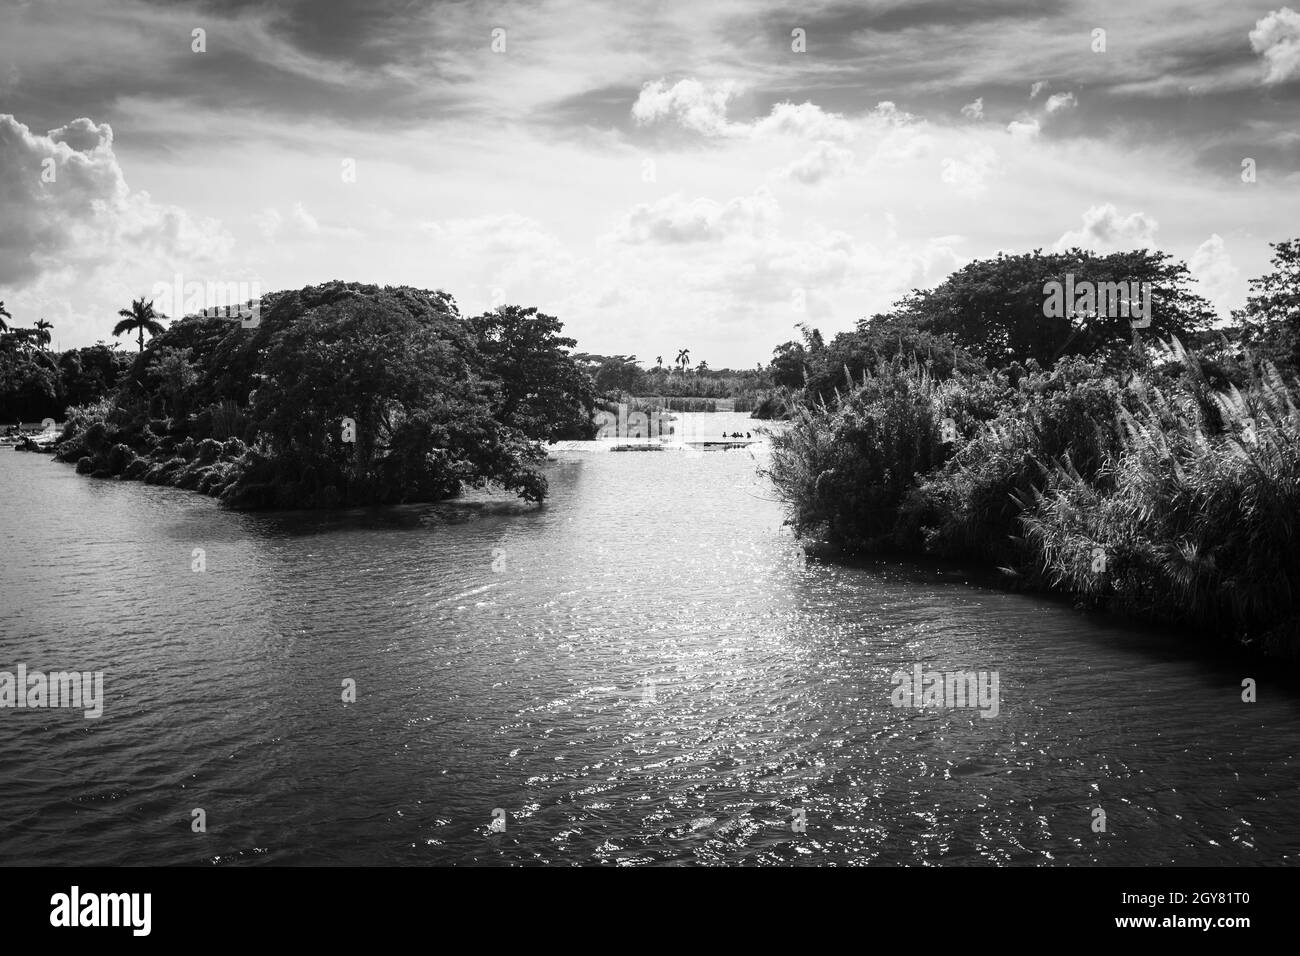 A view black and white of a river that folks, with the strong sunlight and a far group of people taking a bath surrounded by the virgin nature. Stock Photo